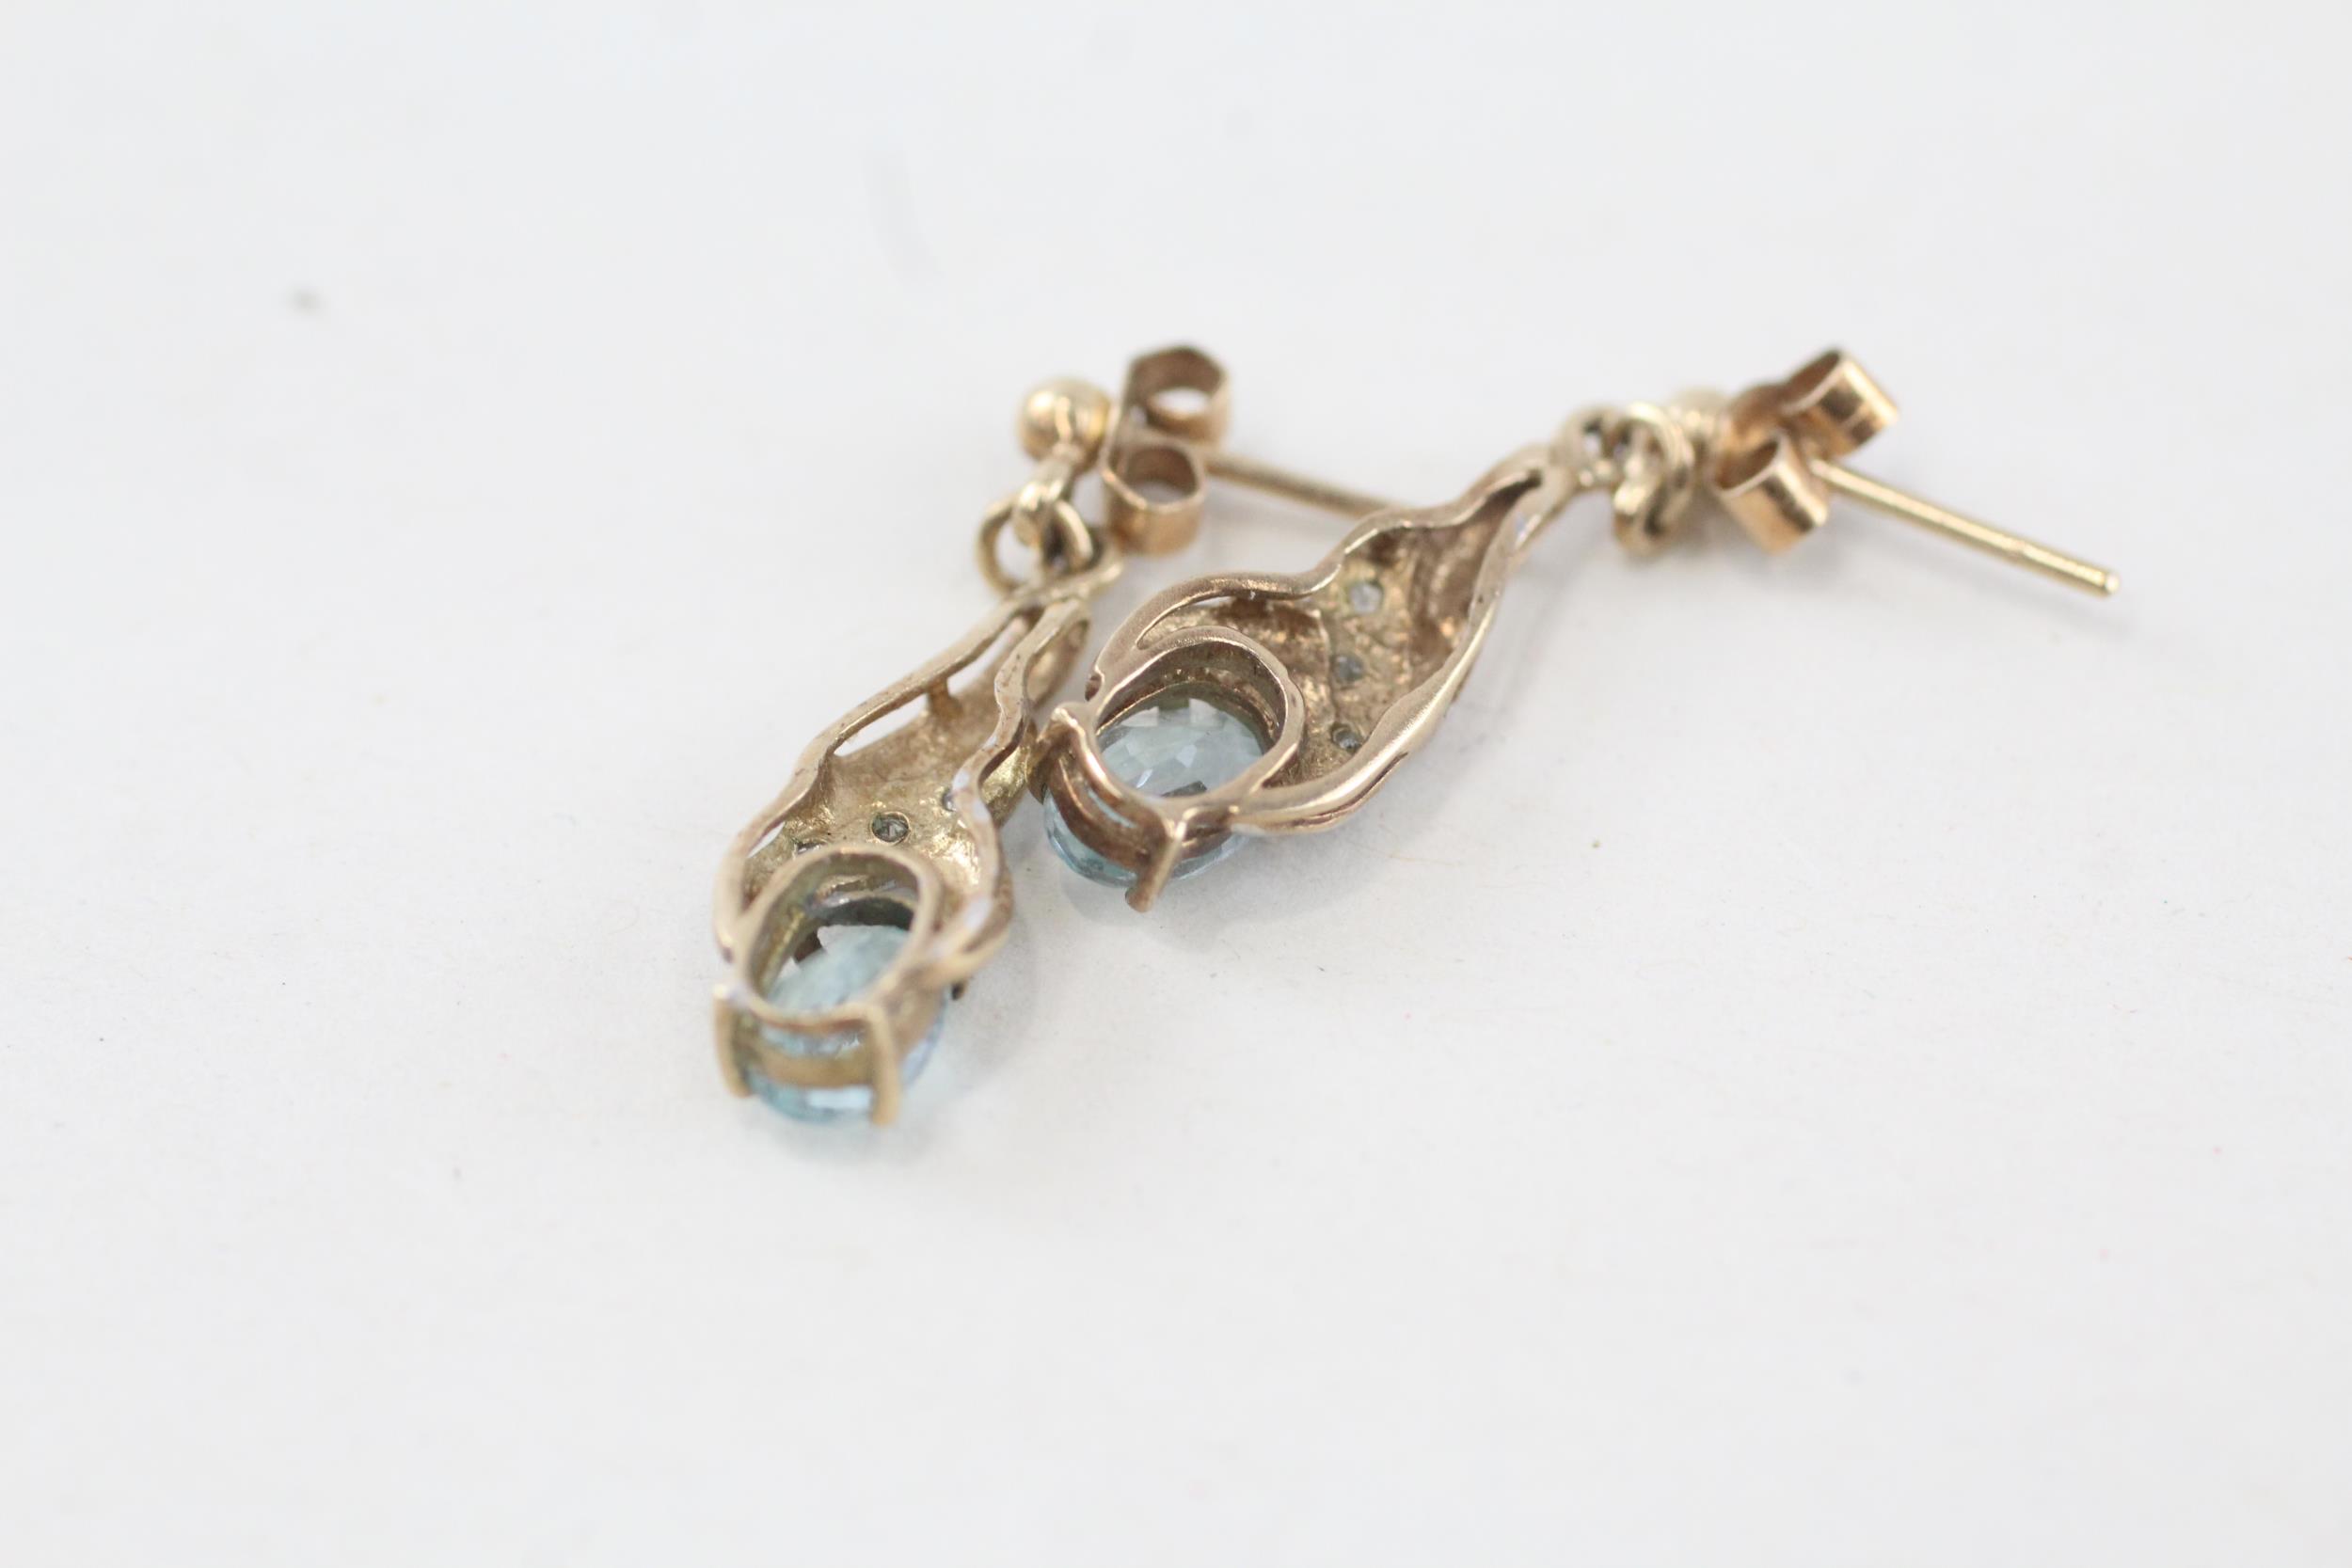 9ct gold oval cut blue topaz and diamond set drop earrings - 1.6 g - Image 3 of 4